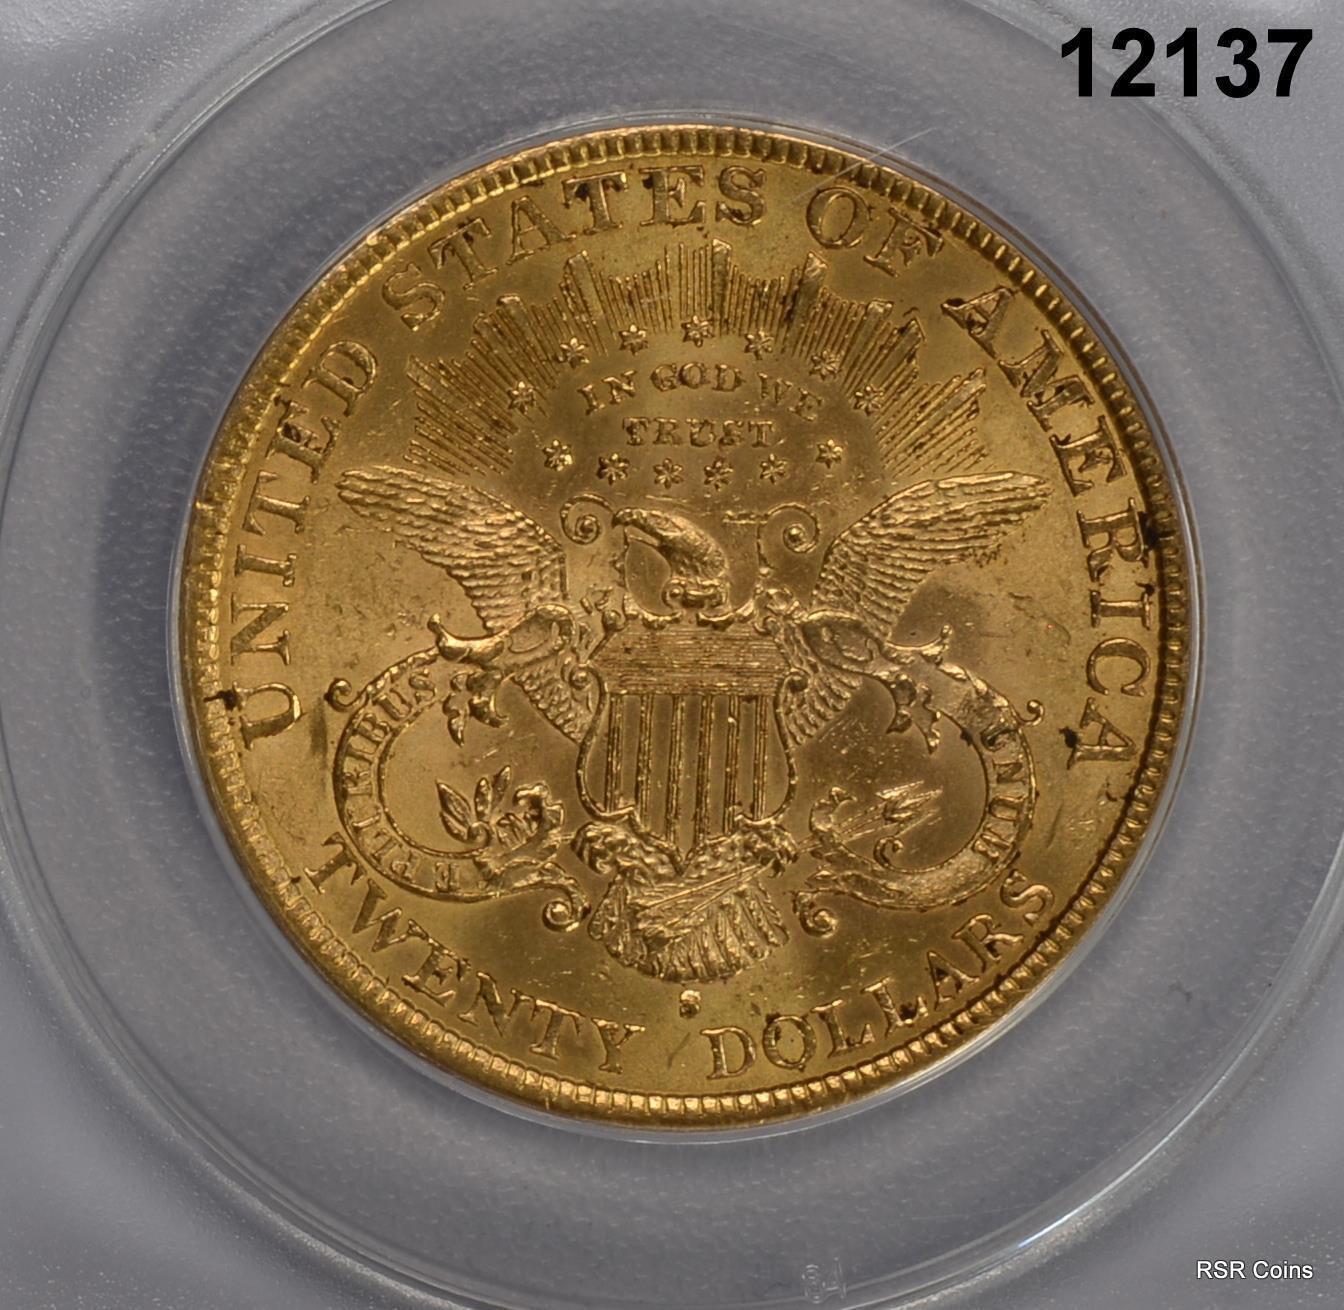 1897 S $20 GOLD LIBERTY ANACS CERTIFIED AU55 LOOKS BETTER! #12137